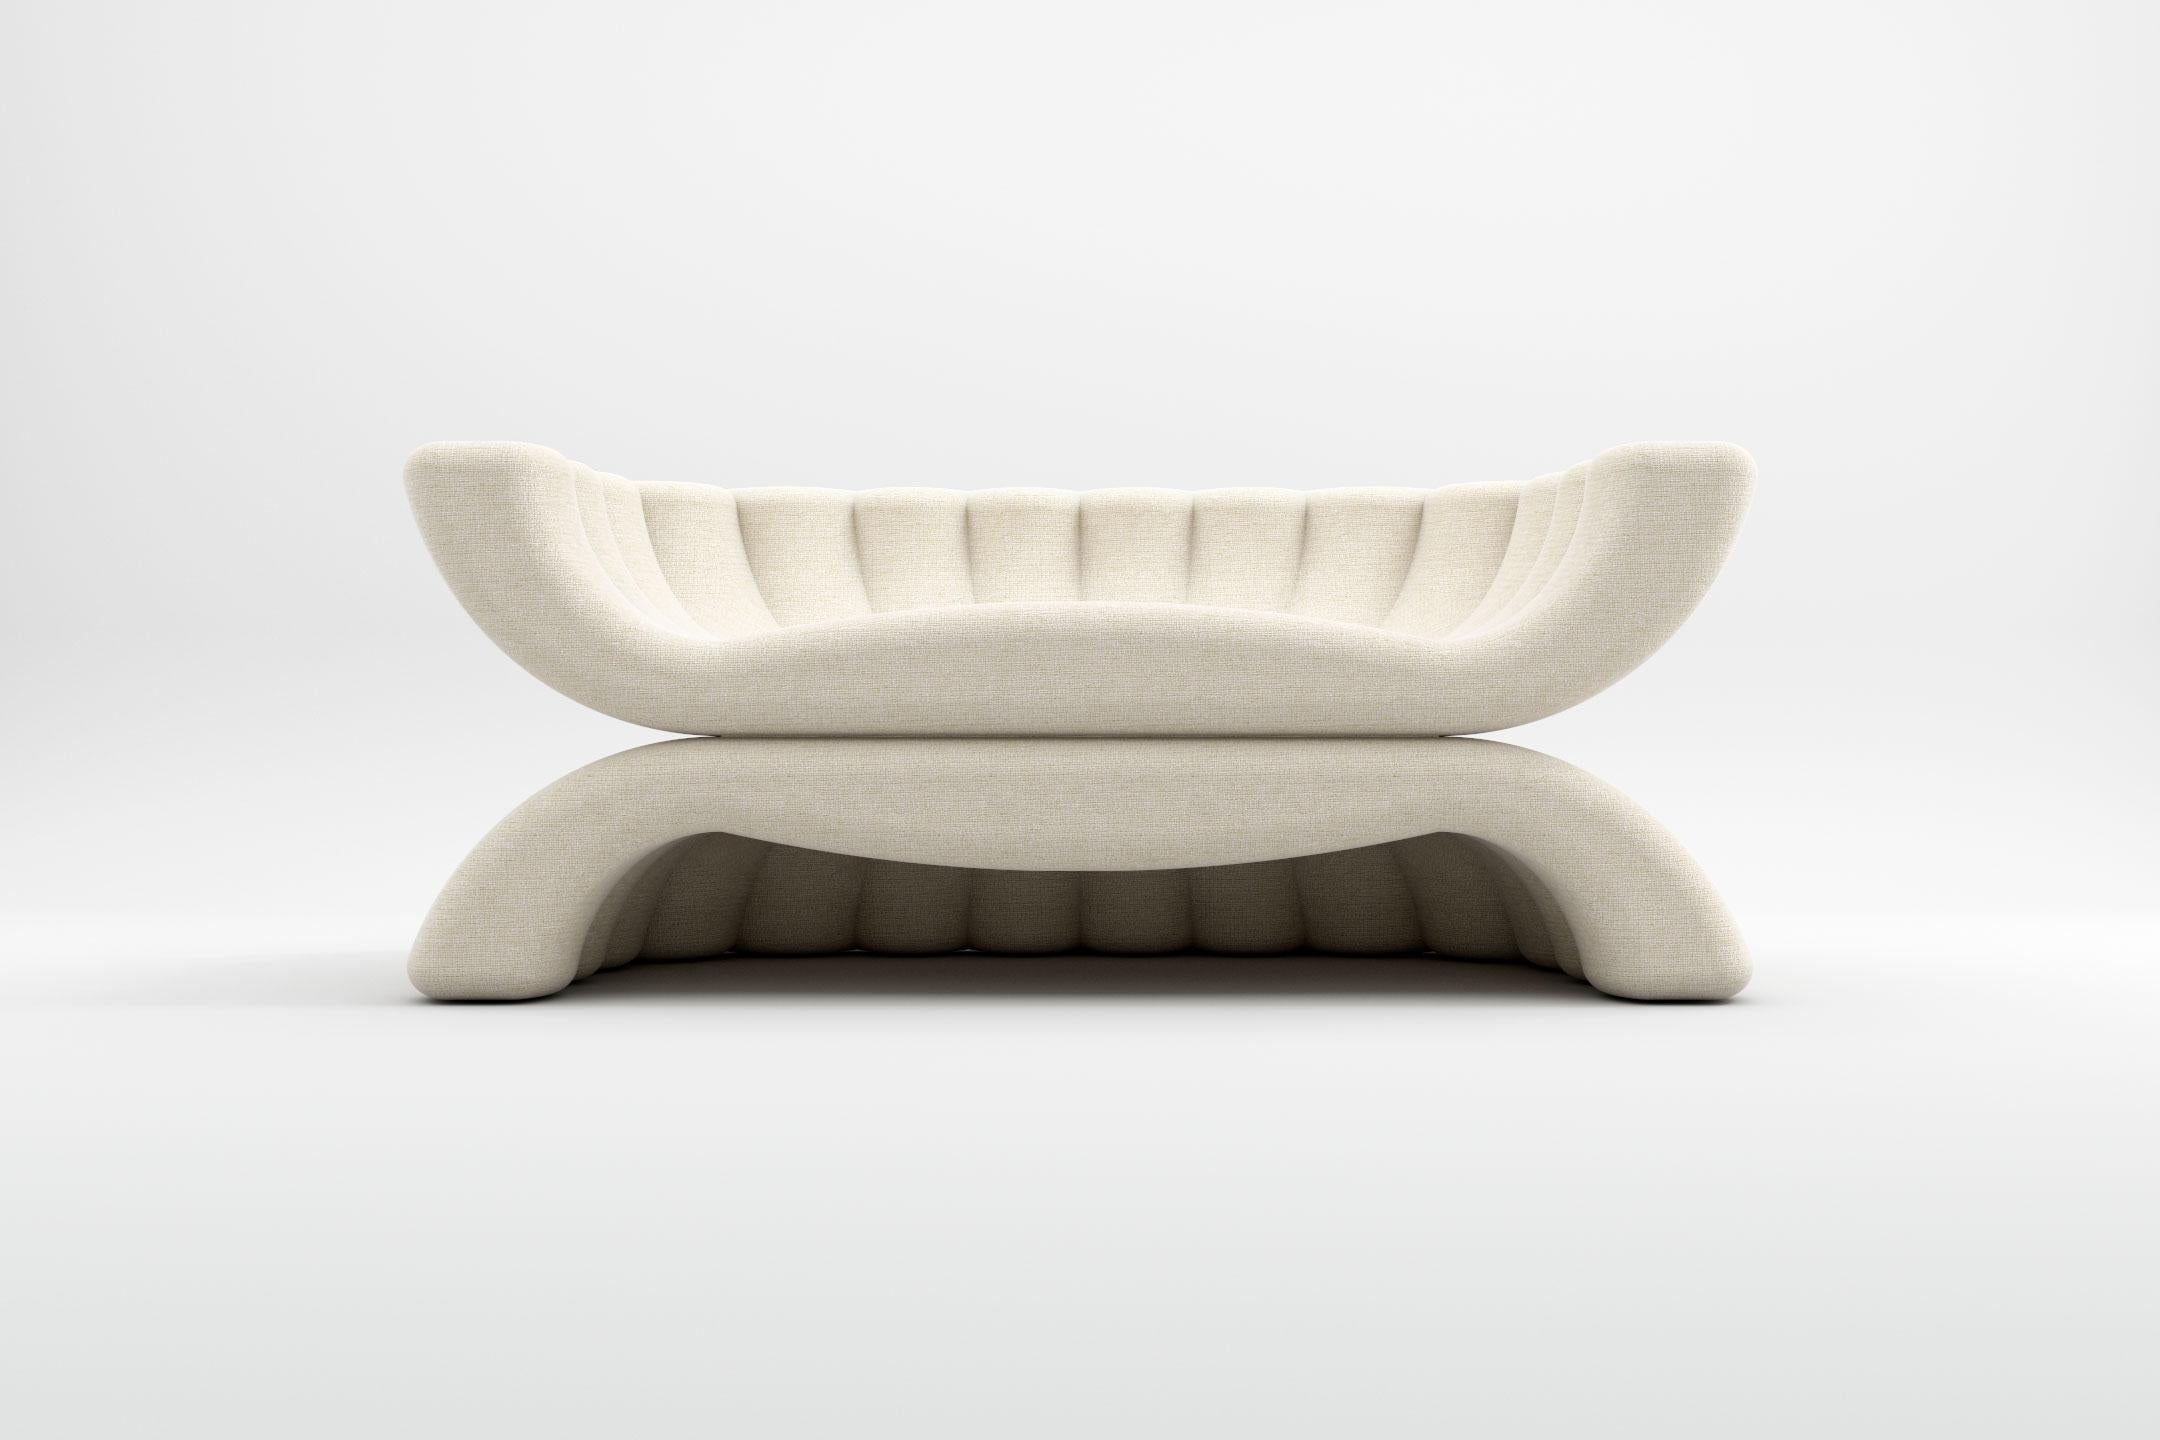 Crafted with the most exquisite fabrics, the embracing curves of the Shell collection draw a sense of warmth and comfort into every environment. The piece was designed and manufactured by Prieto Studio, a furniture design studio based in London that